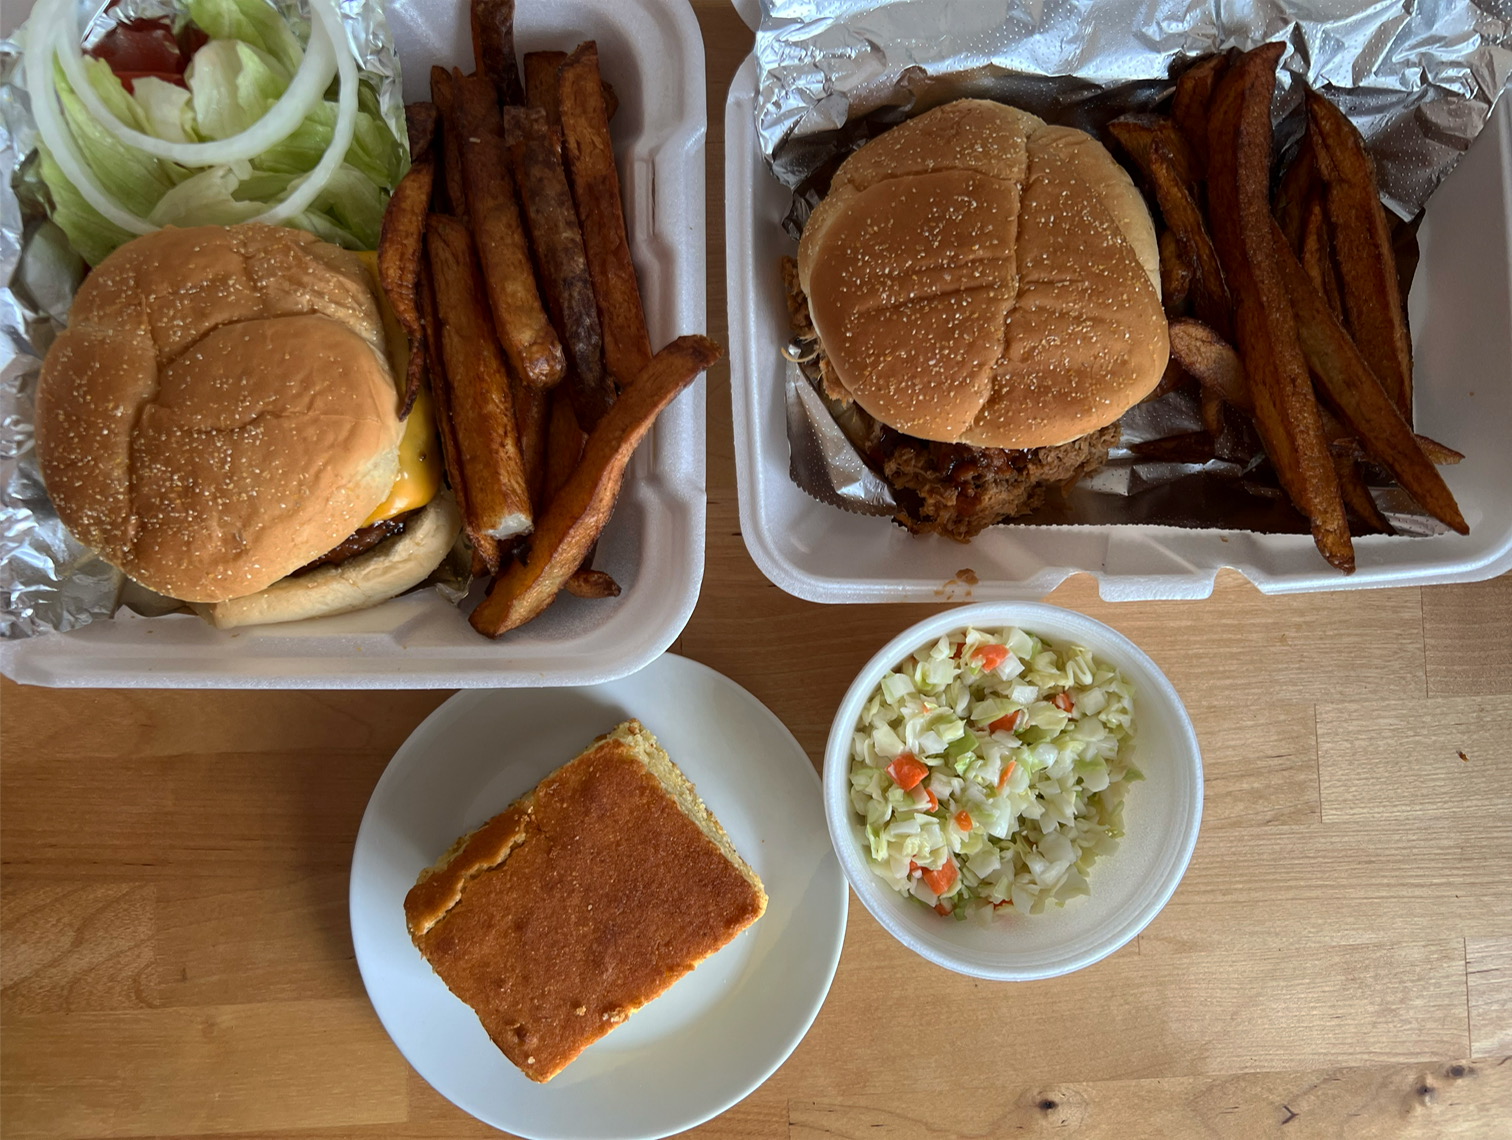 Takeout from Sooie Bros Bar B Que. Two sandwiches with sides of fries are in to-go containers. A slice of cornbread is on a plate next to them, as well as a container of cole slaw.